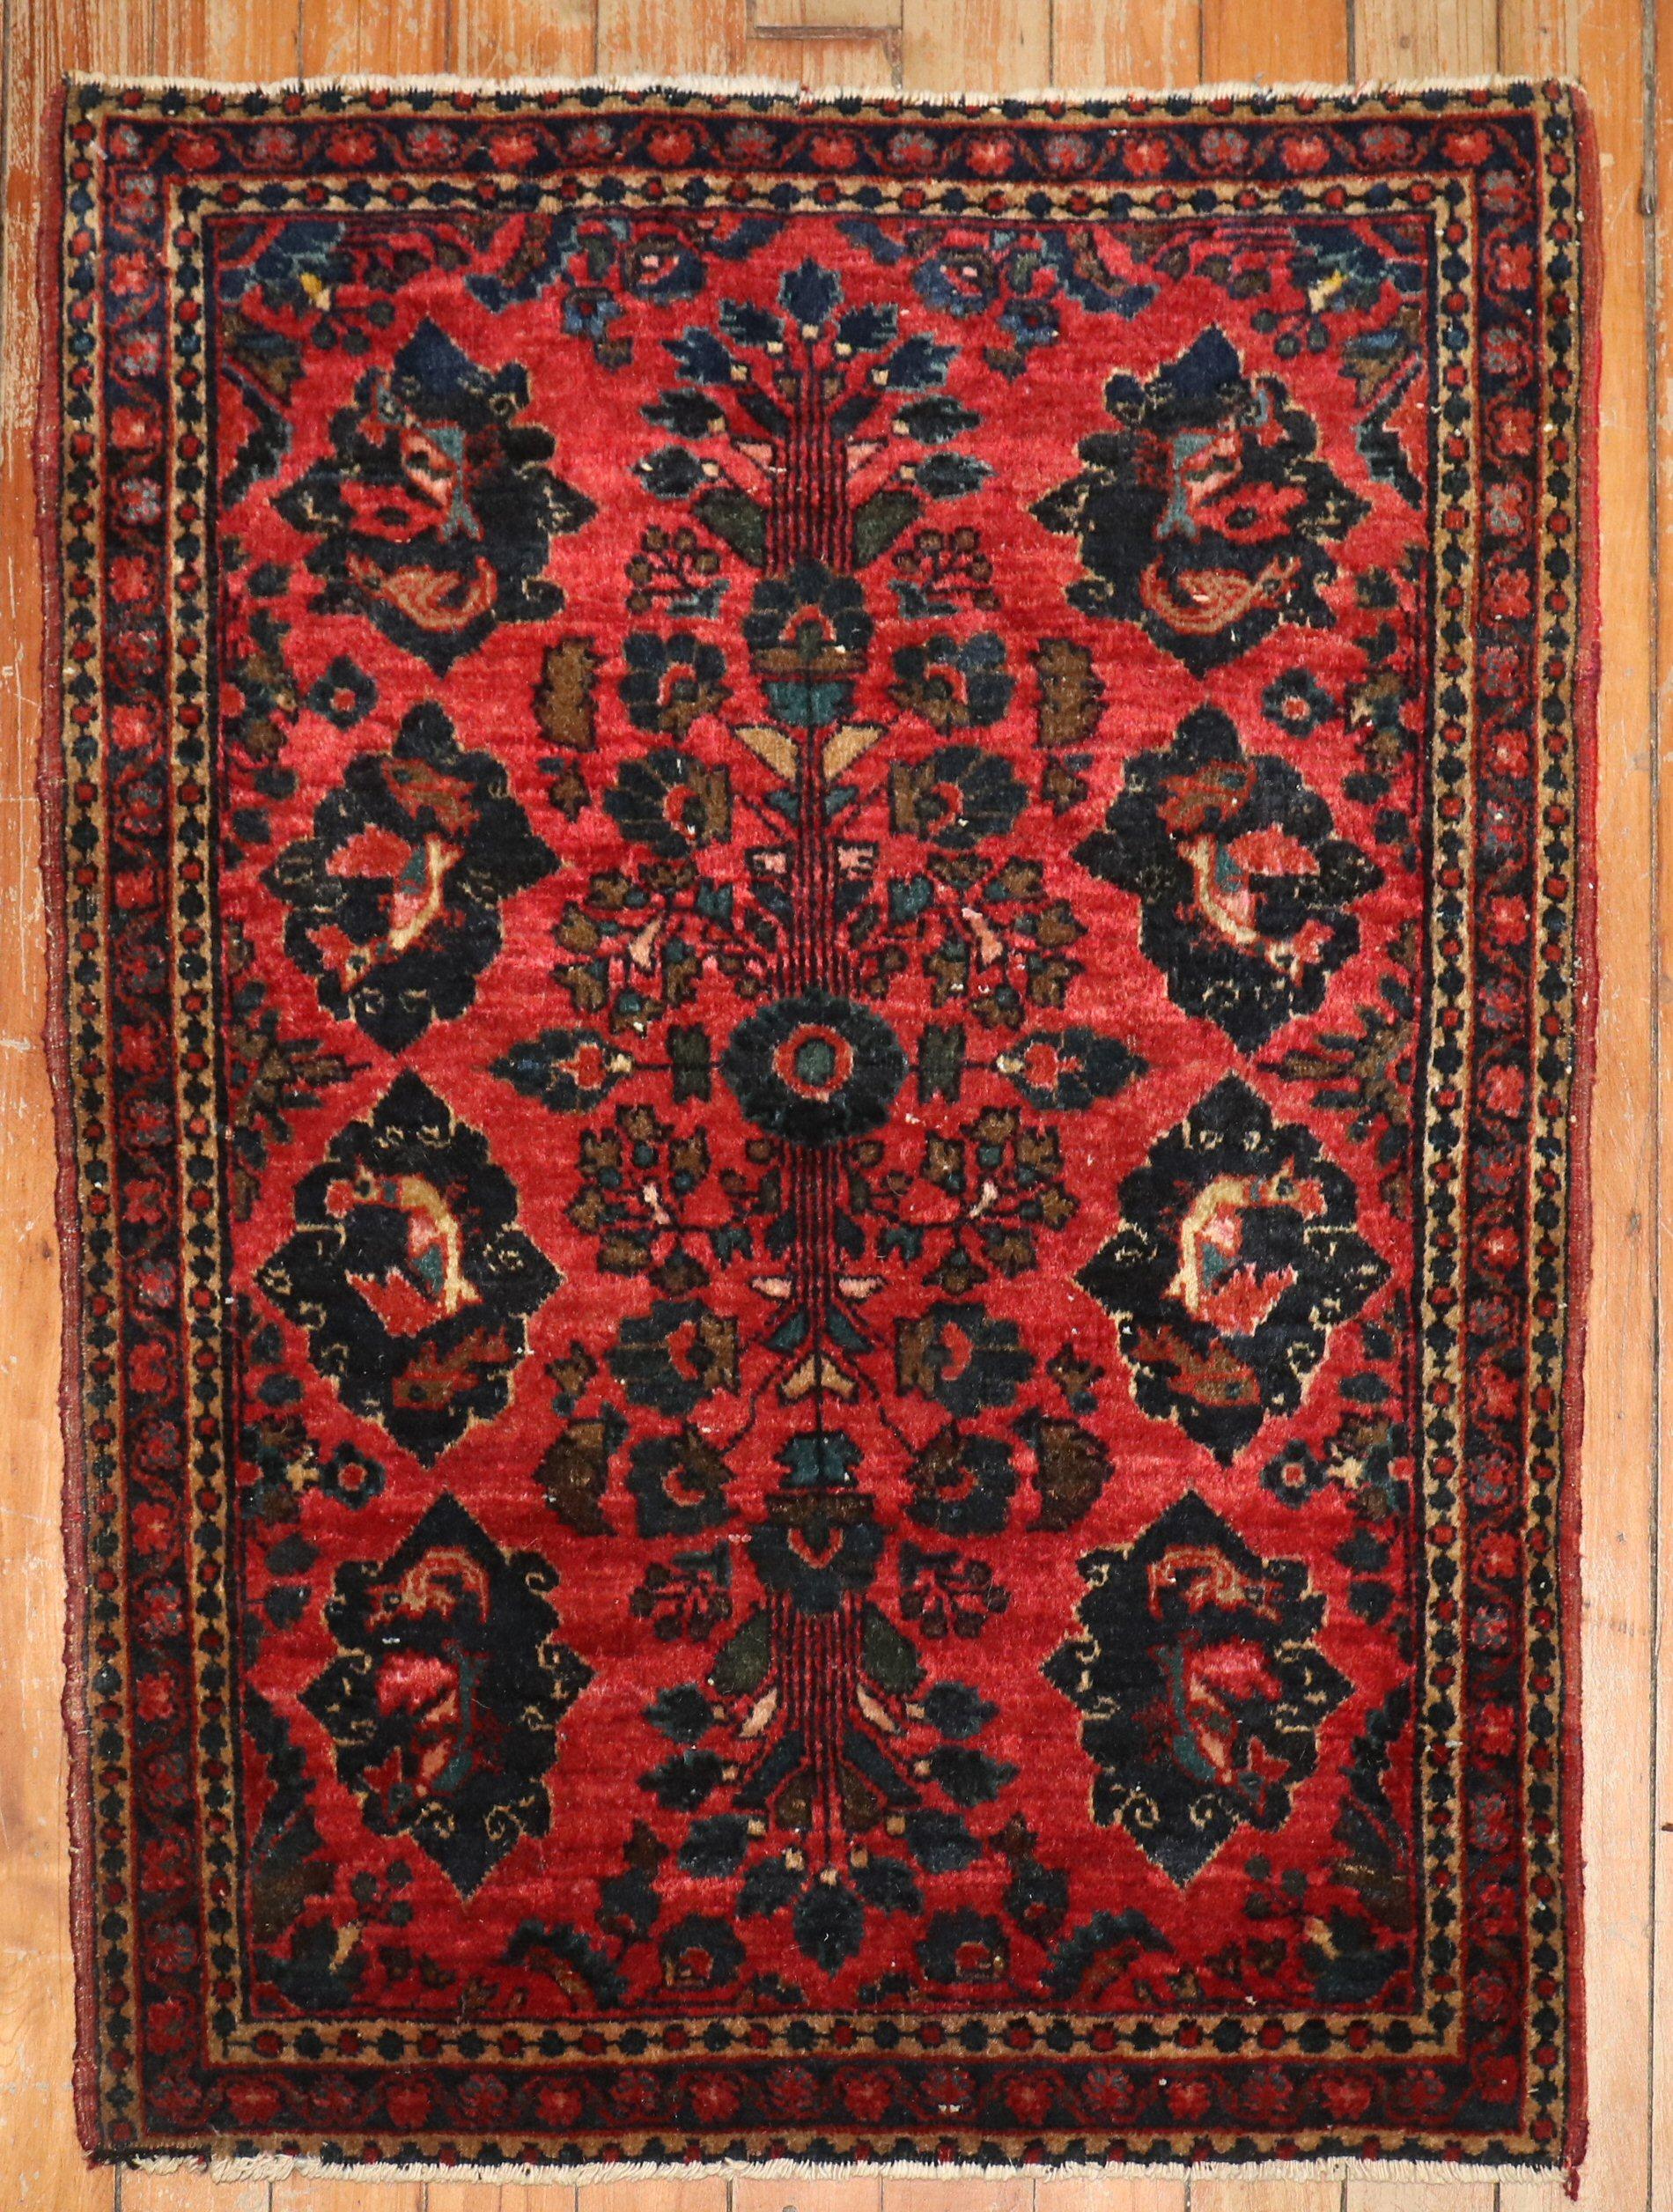 1920s Persian Sarouk mat-size rug with small turkeys and fish swarming in navy palmettes on a red ground

1'10'' x 2'6''
.